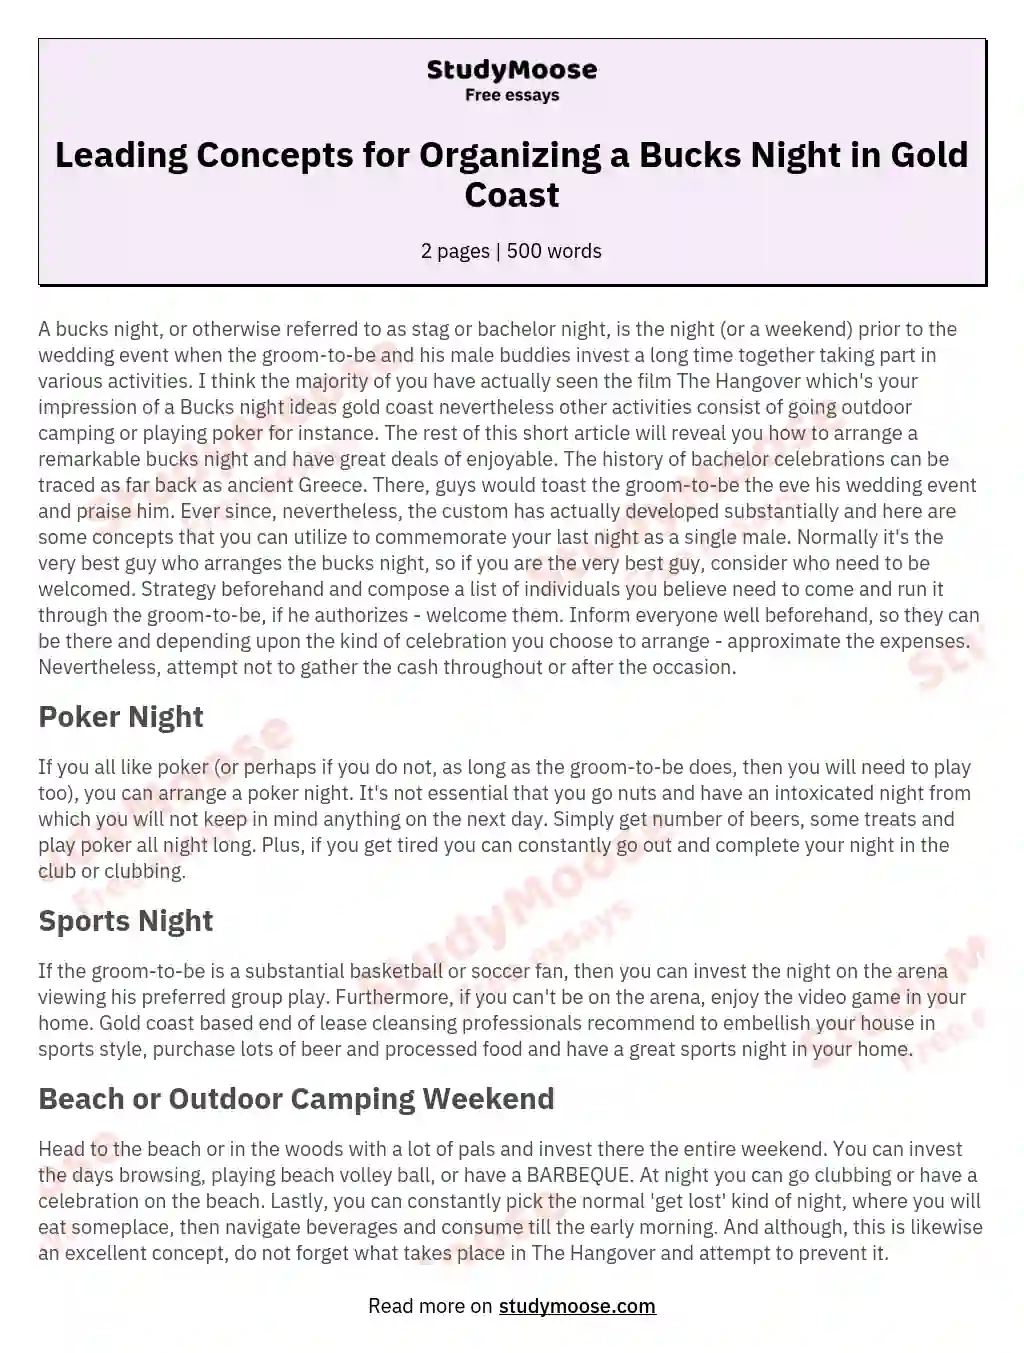 Leading Concepts for Organizing a Bucks Night in Gold Coast